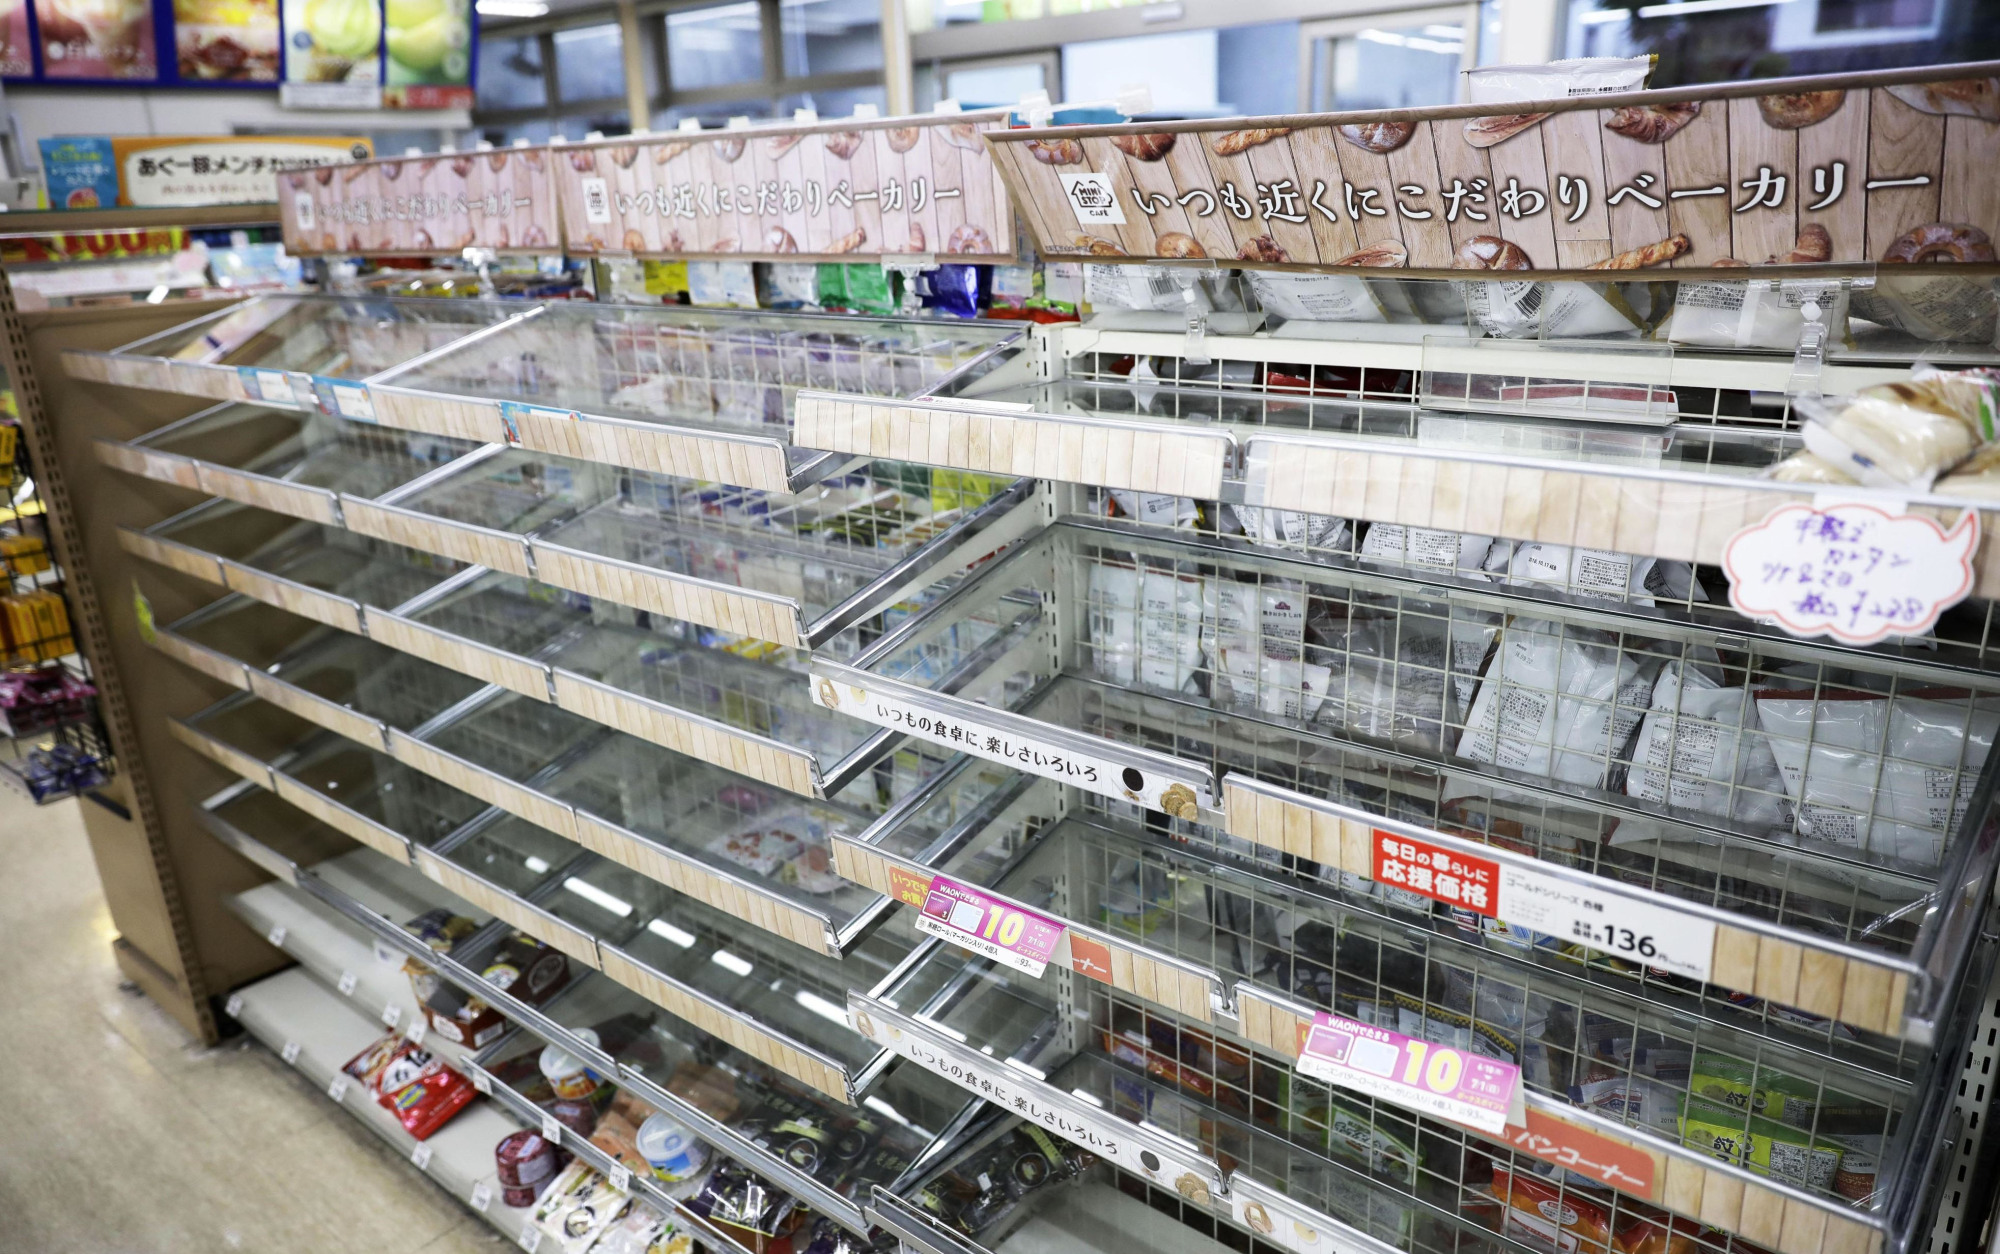 Convenience store shelves are mostly empty on Monday at a convenience store in Ibaraki, Osaka Prefecture, after people flocked to buy food following a strong quake in the area. | KYODO